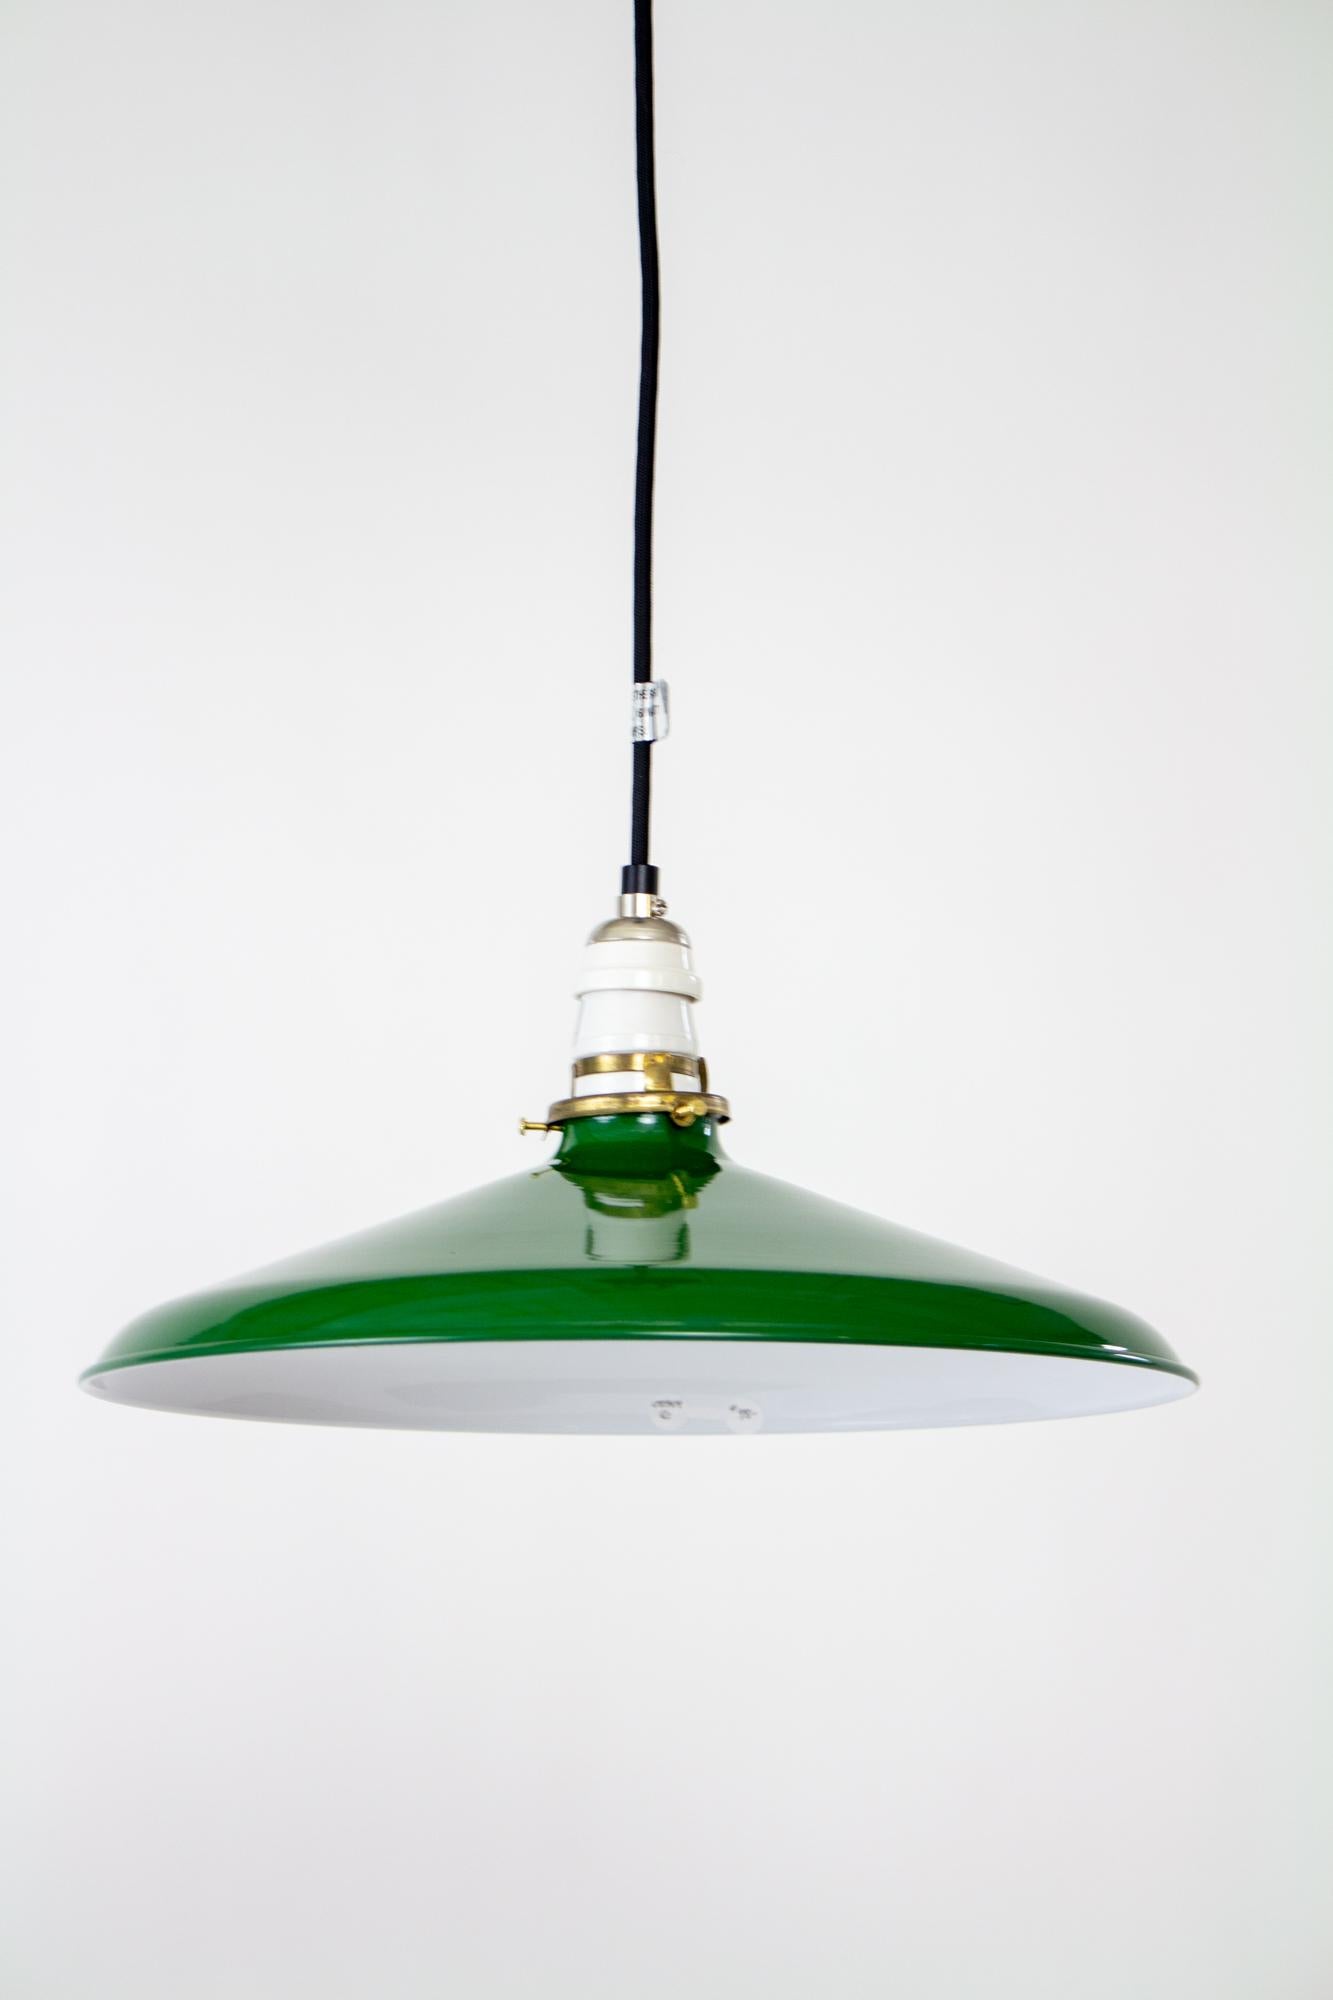 Green enamel industrial pendant. Black cord and canopy, porcelain antique style socket, antique clamp fitter and milk glass disk shade. Shown with Edison style bulb as a style suggestion, bulb is not included. Fixture is adjustable from 11